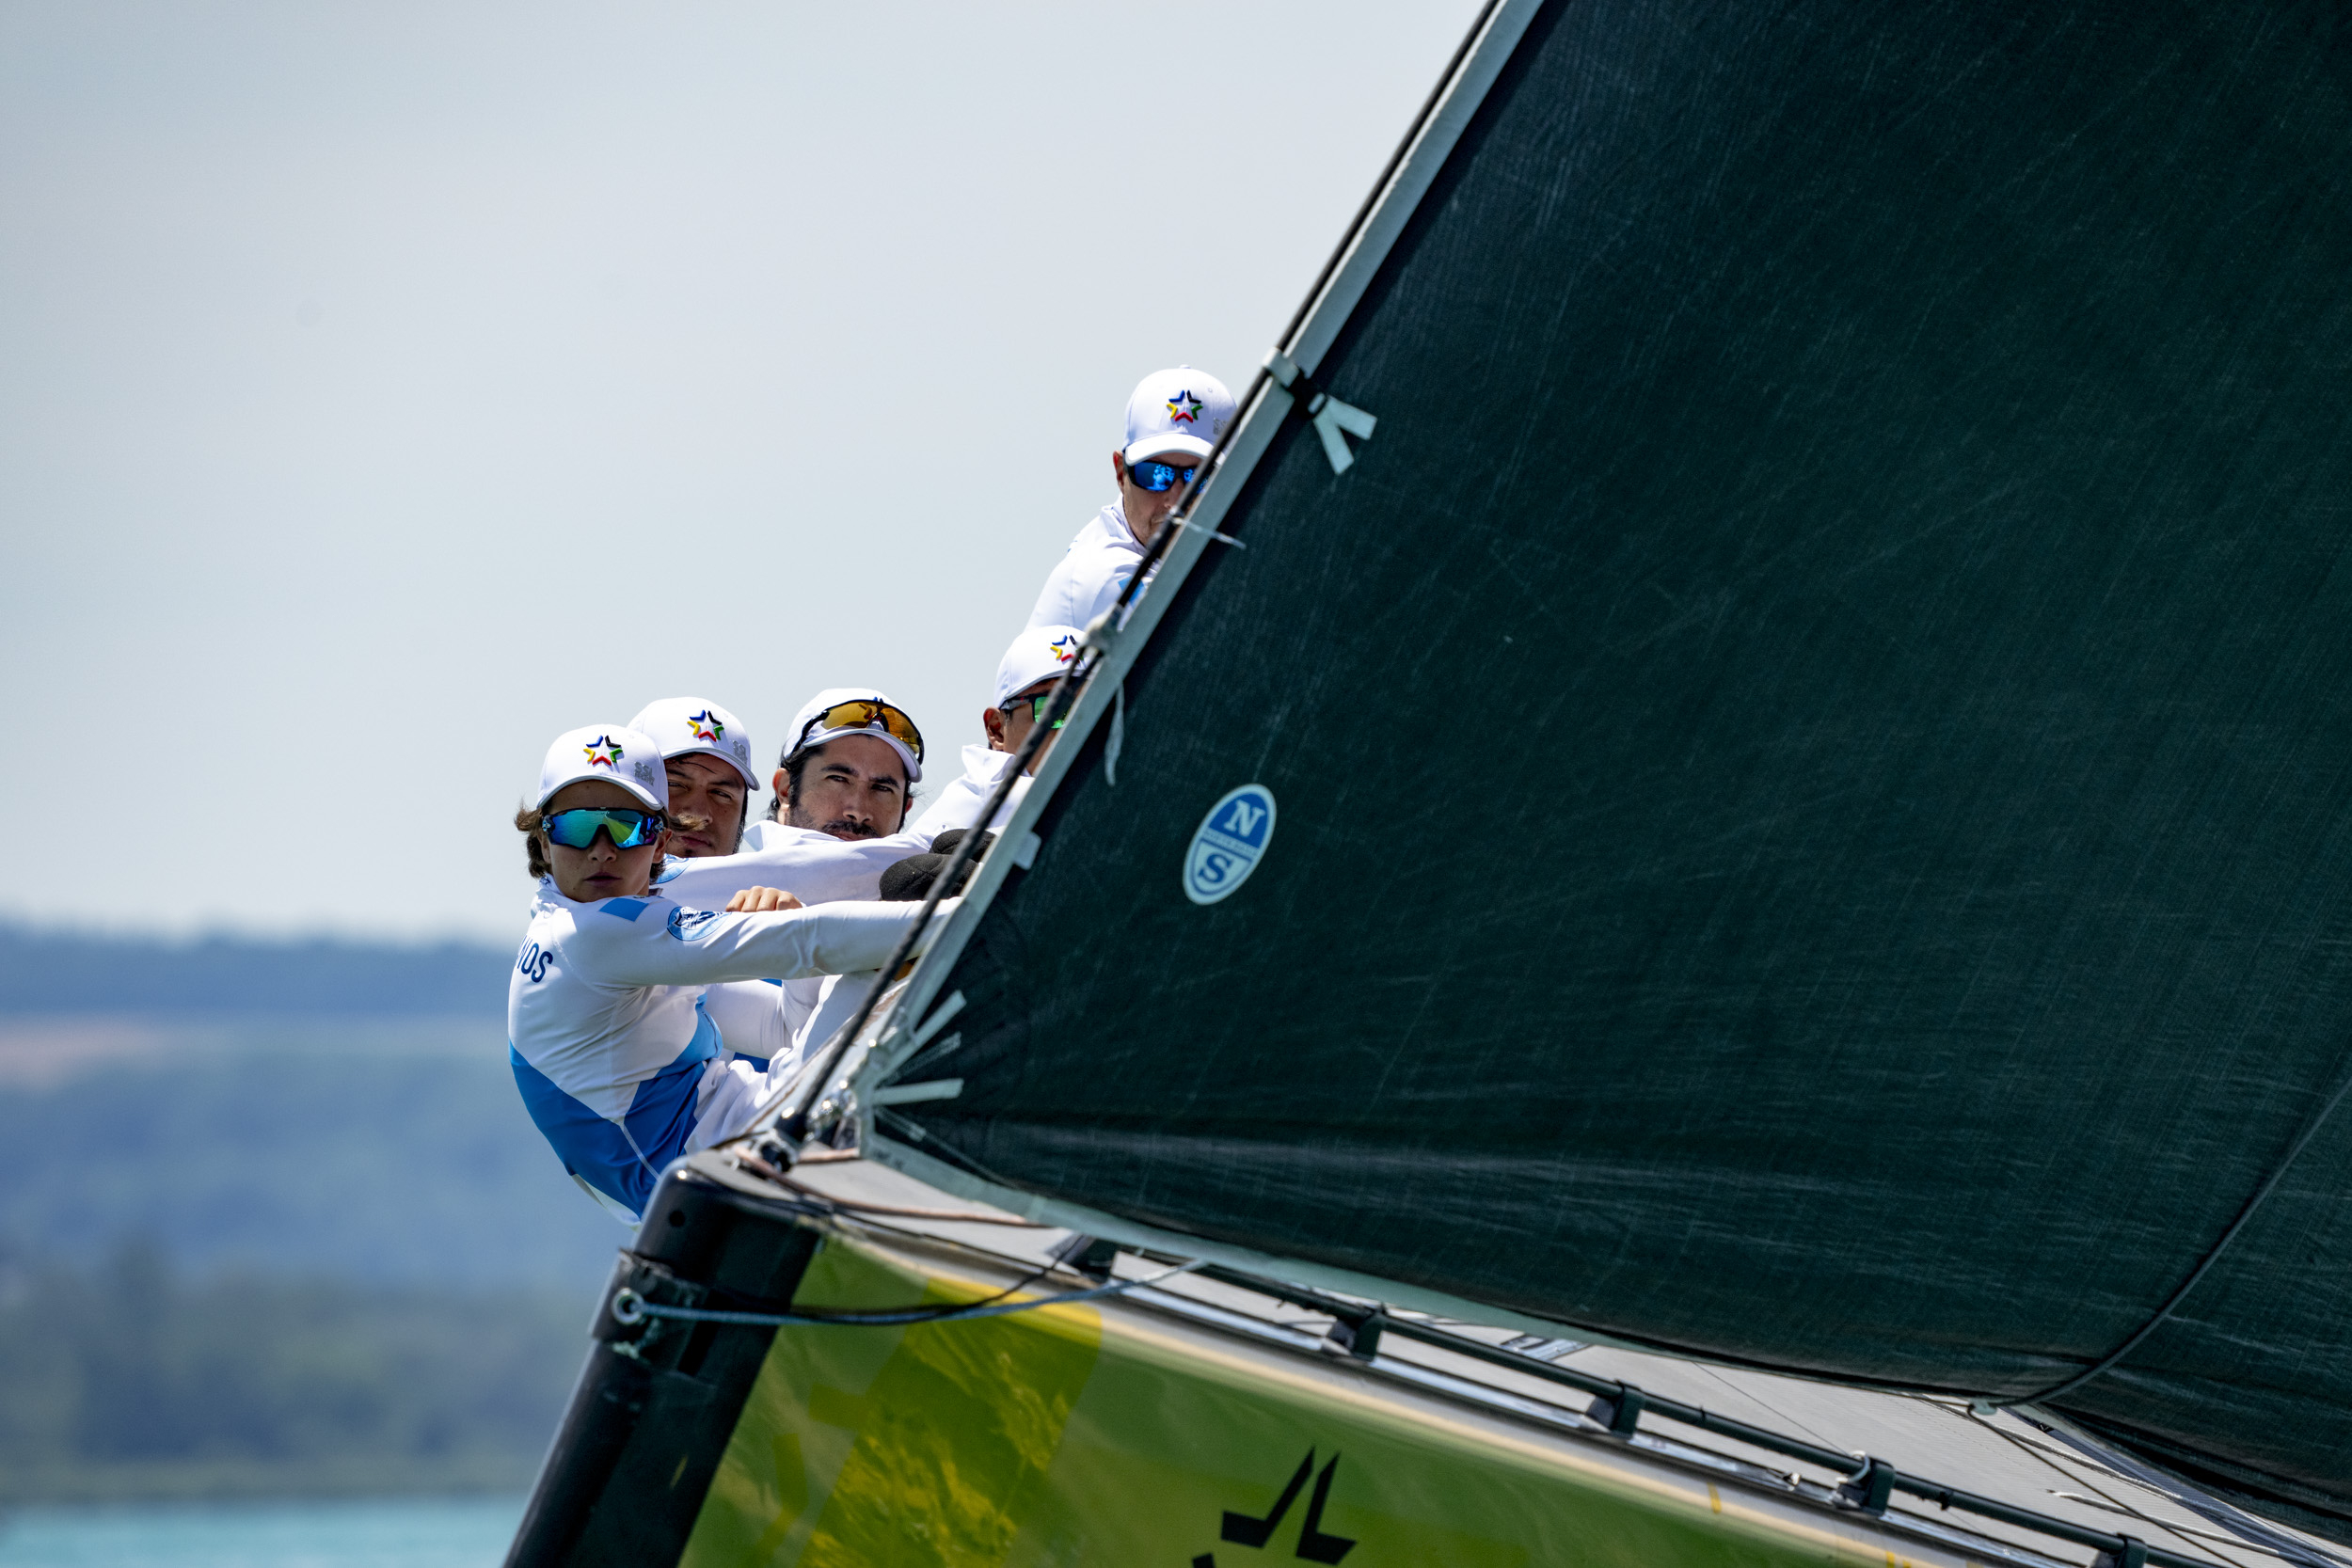  SSL 47  Goldcup  Qualifying  Round 4  Grandson SUI  Day 1